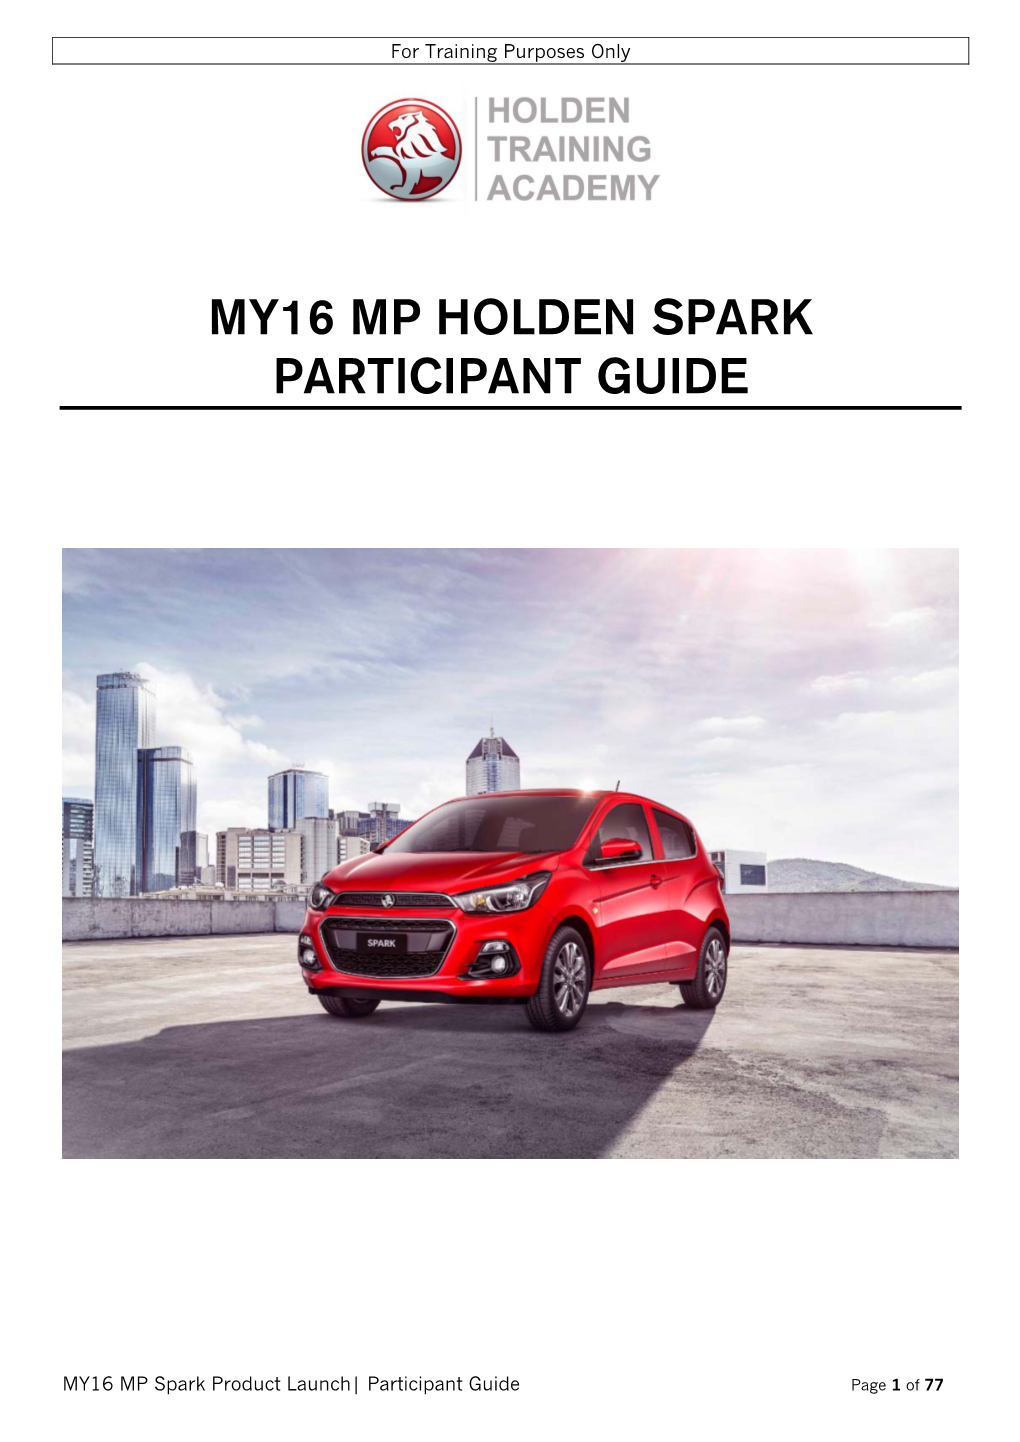 My16 Mp Holden Spark Participant Guide